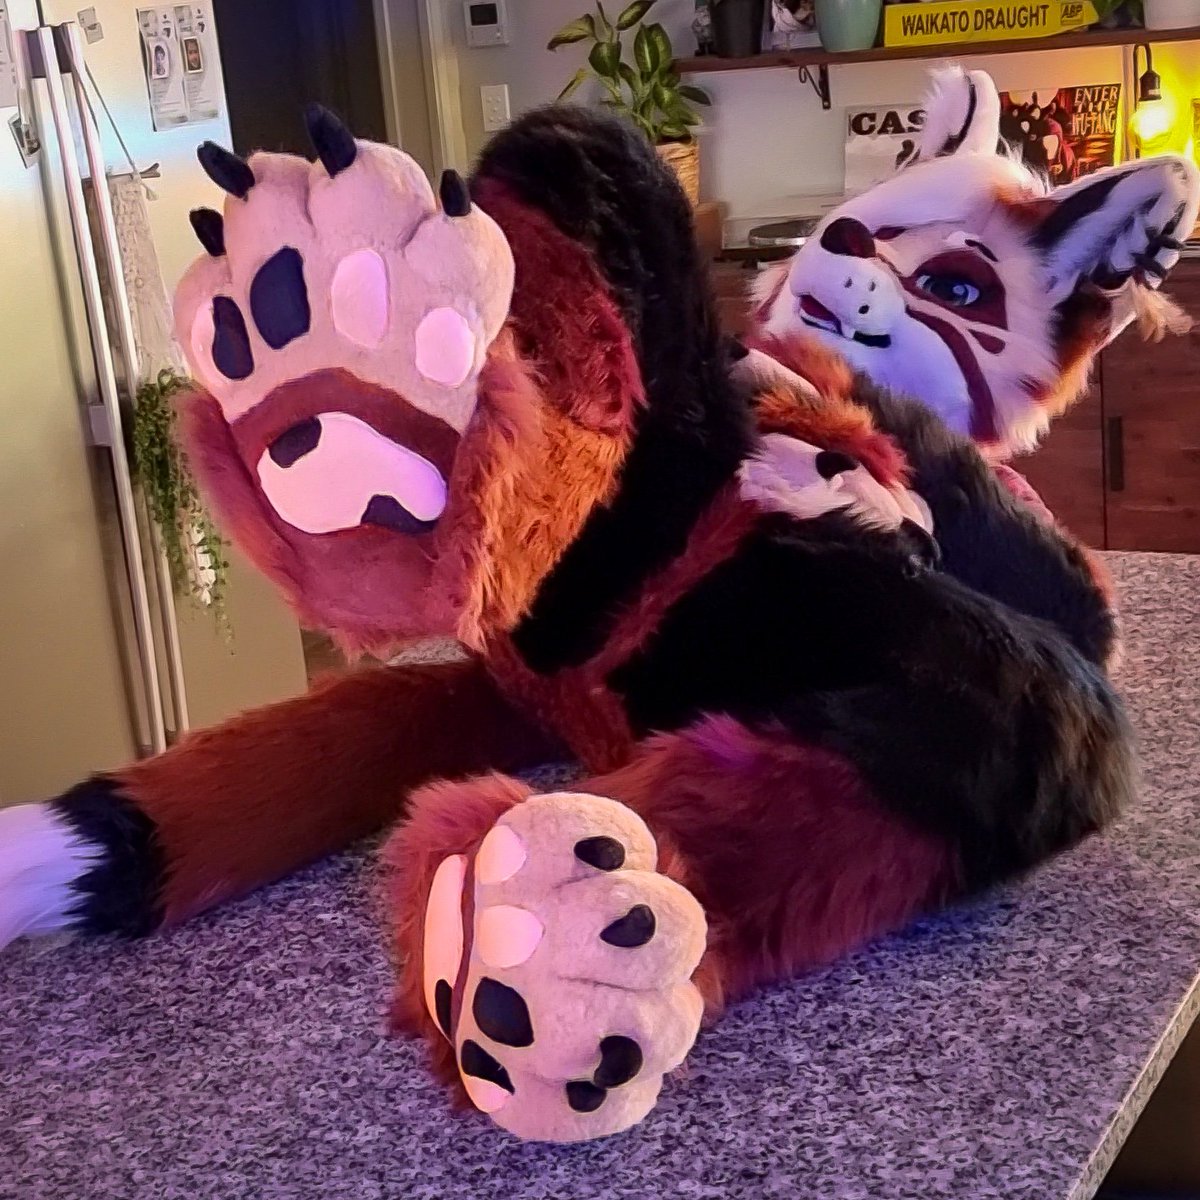 Apparently it's #PawDay? Am I doin' this right?